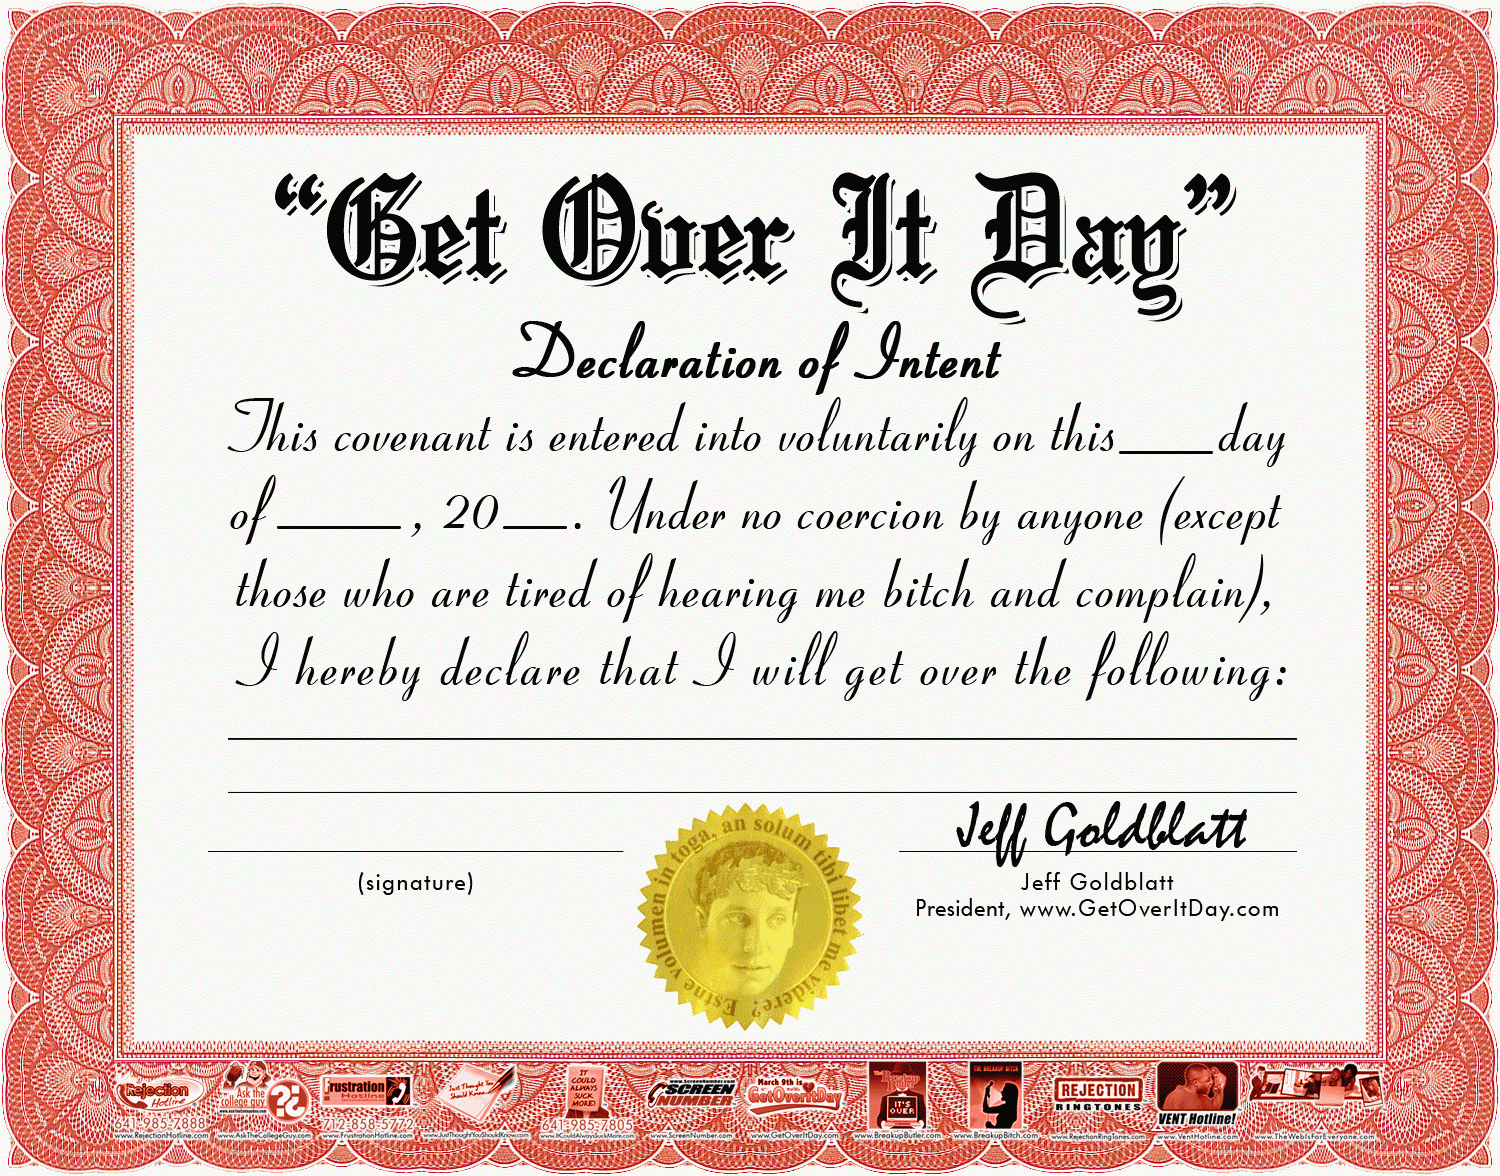 Funny Office Awards Youtube. Silly Certificates Funny Awards Within Free Printable Funny Certificate Templates